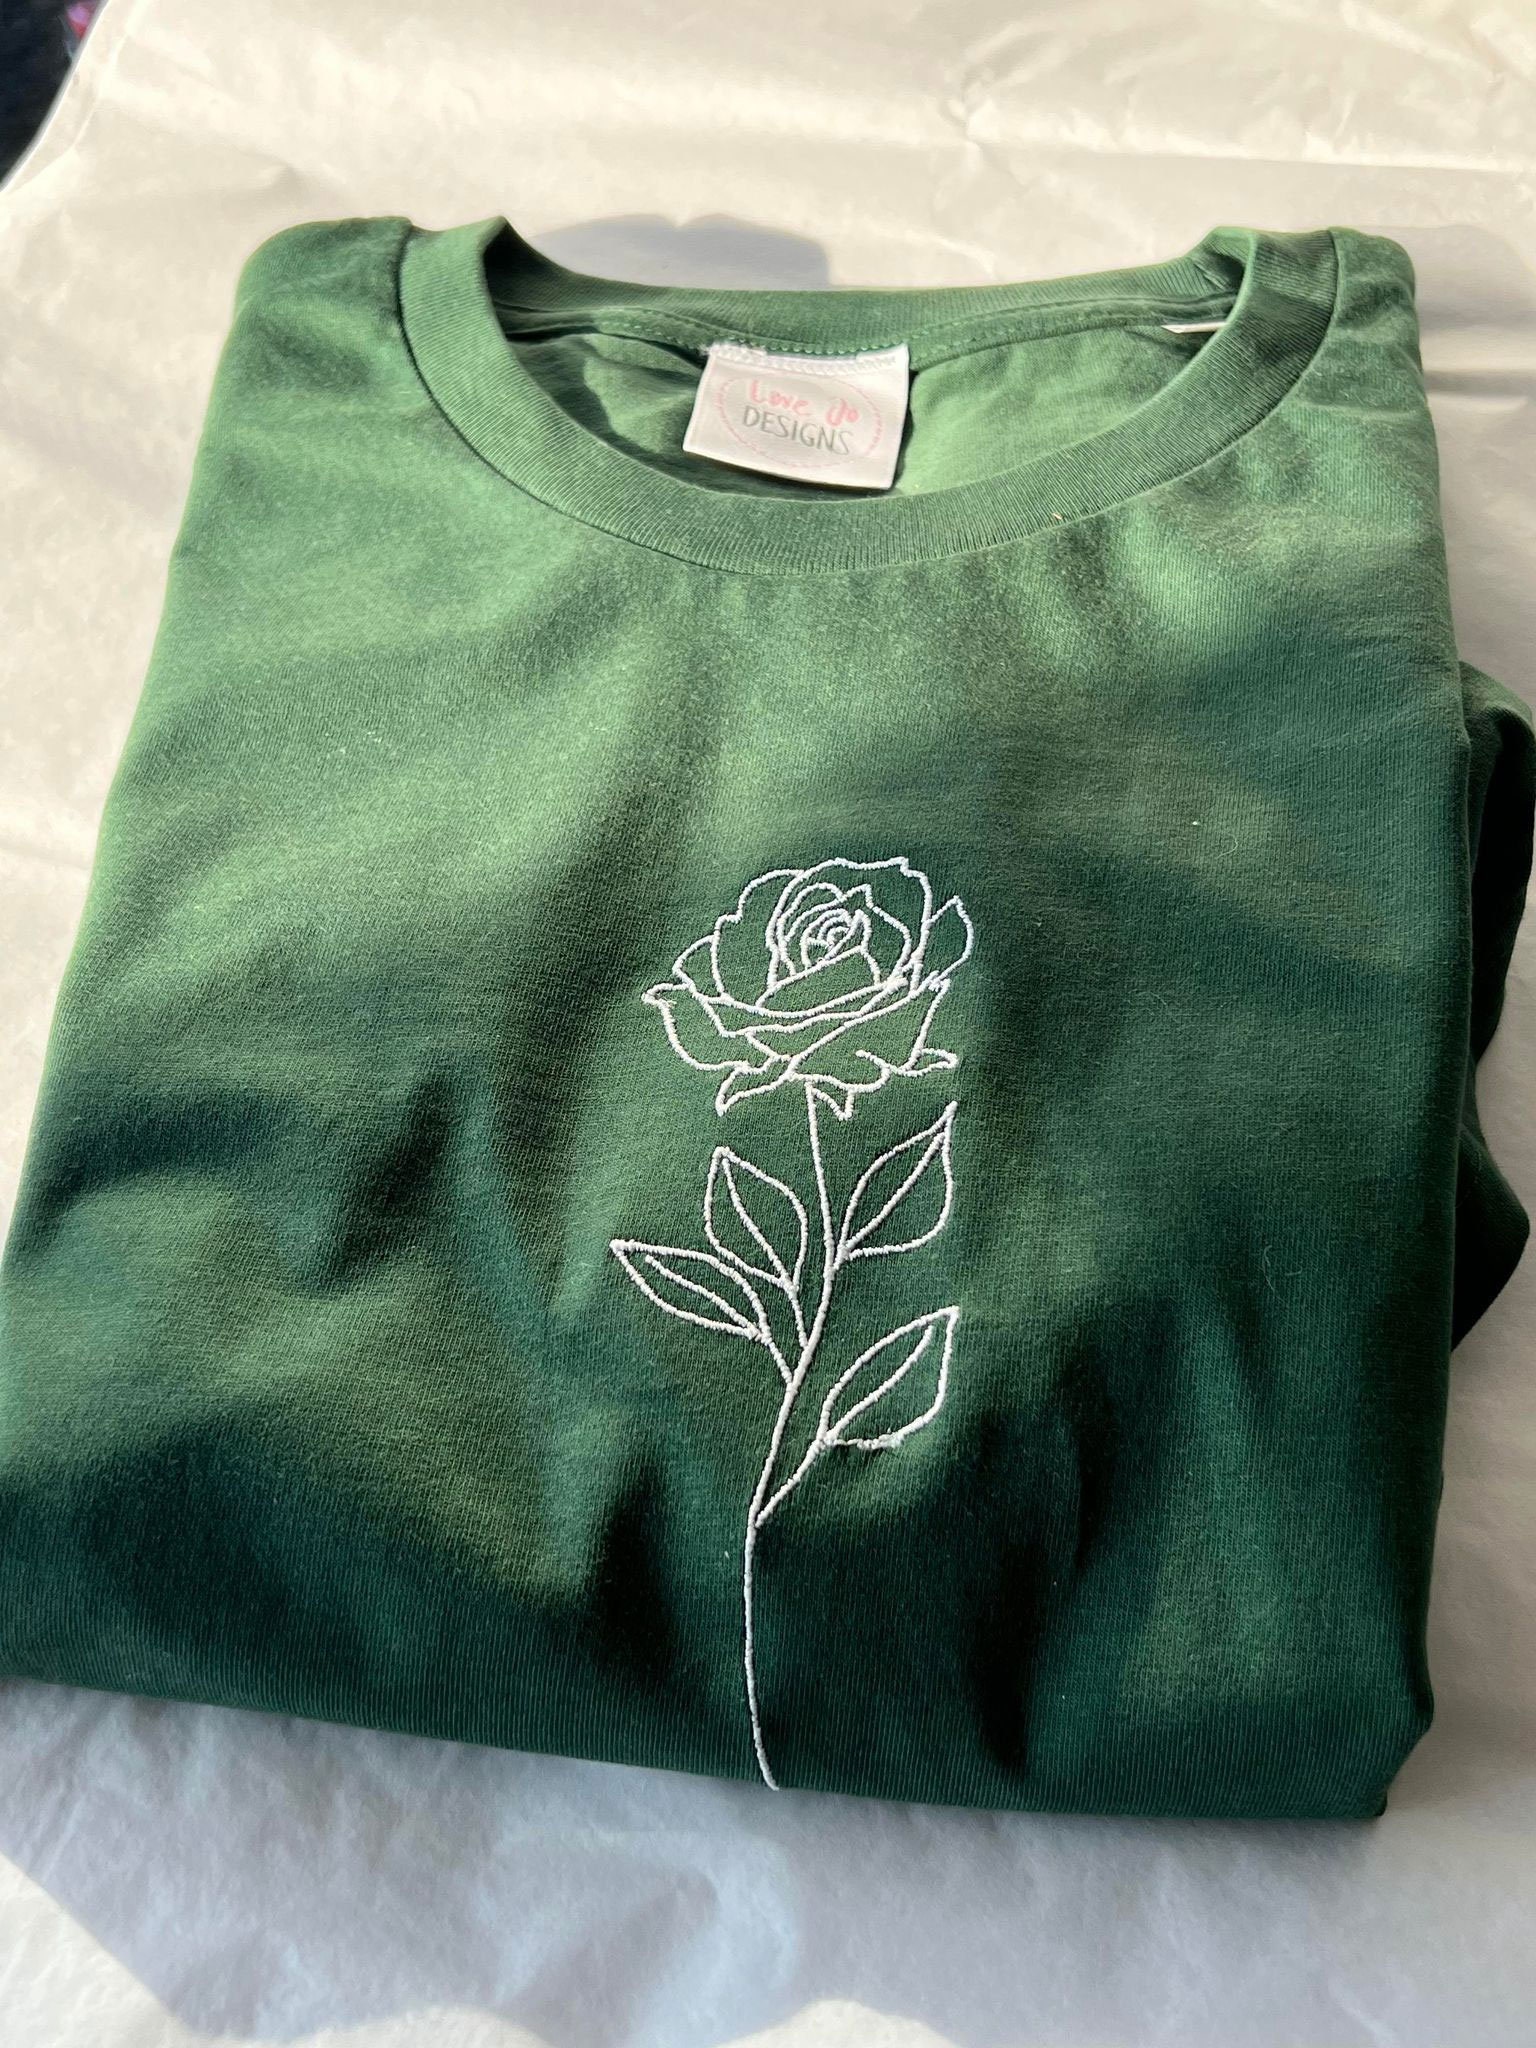 Rose T-shirt Hand Designs Top Unique Soft Drawn Embroidered Organic - Etsy Sustainable Single Rose Clothing